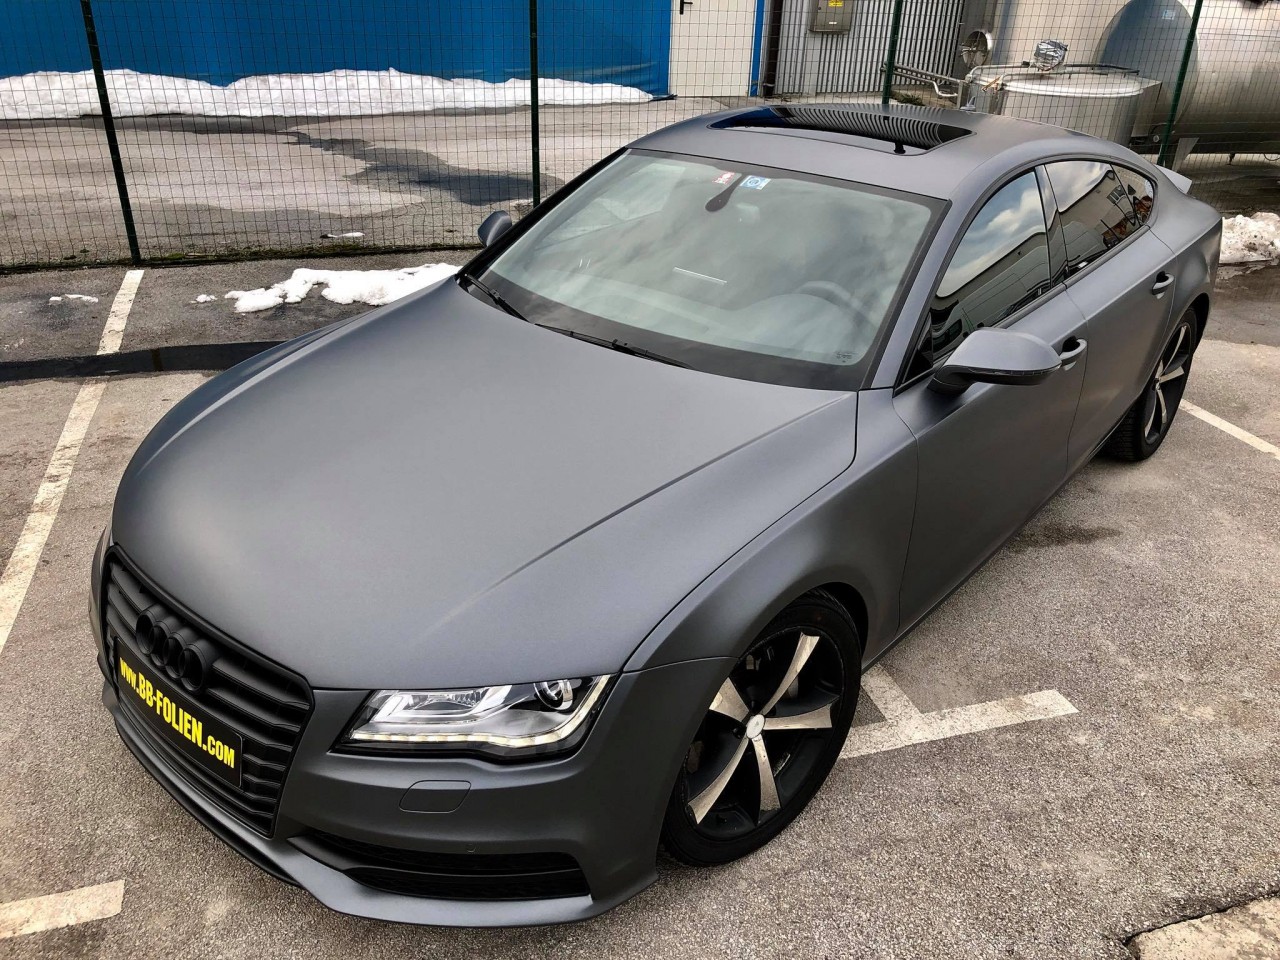 Audi A7, NORMAL CARS, Gallery